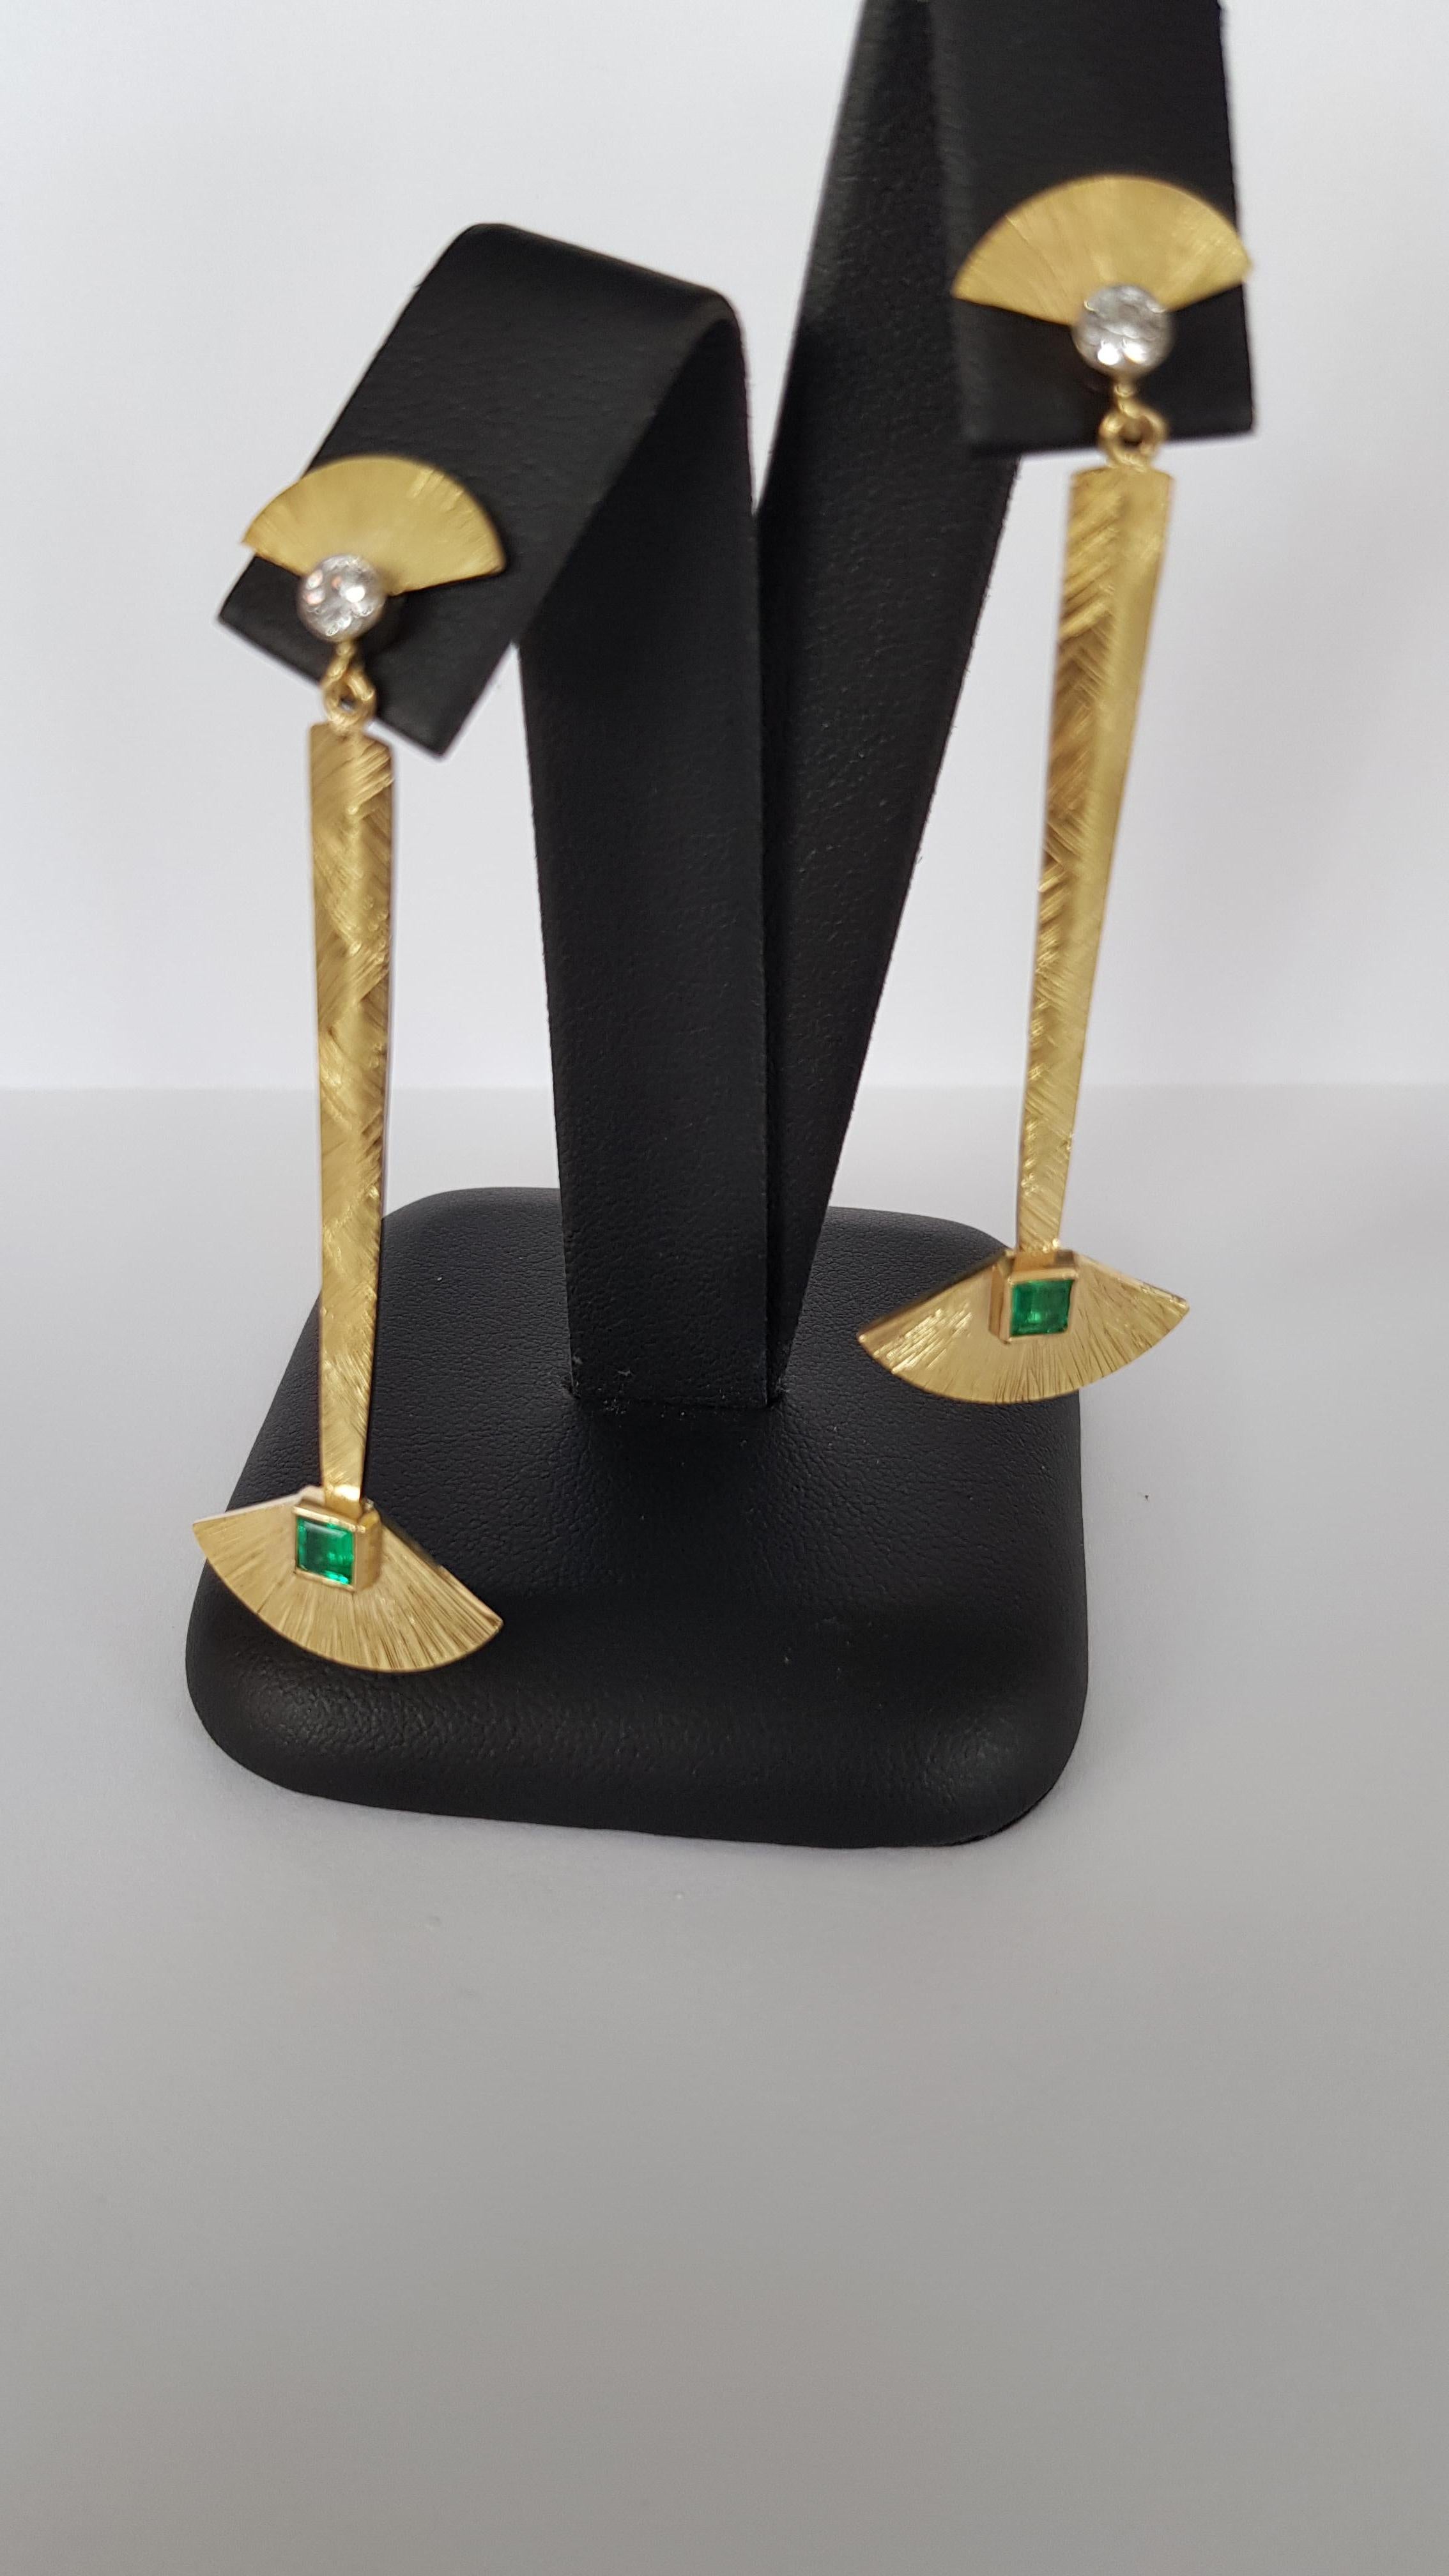 Very dramatic 18CT gold drop earrings in a nod to Egyptian style with Colombian emeralds and Diamonds ,hand fabricated and pattern applied
Diamonds FVVS 0.30CT Emeralds approx 0.65CT

.